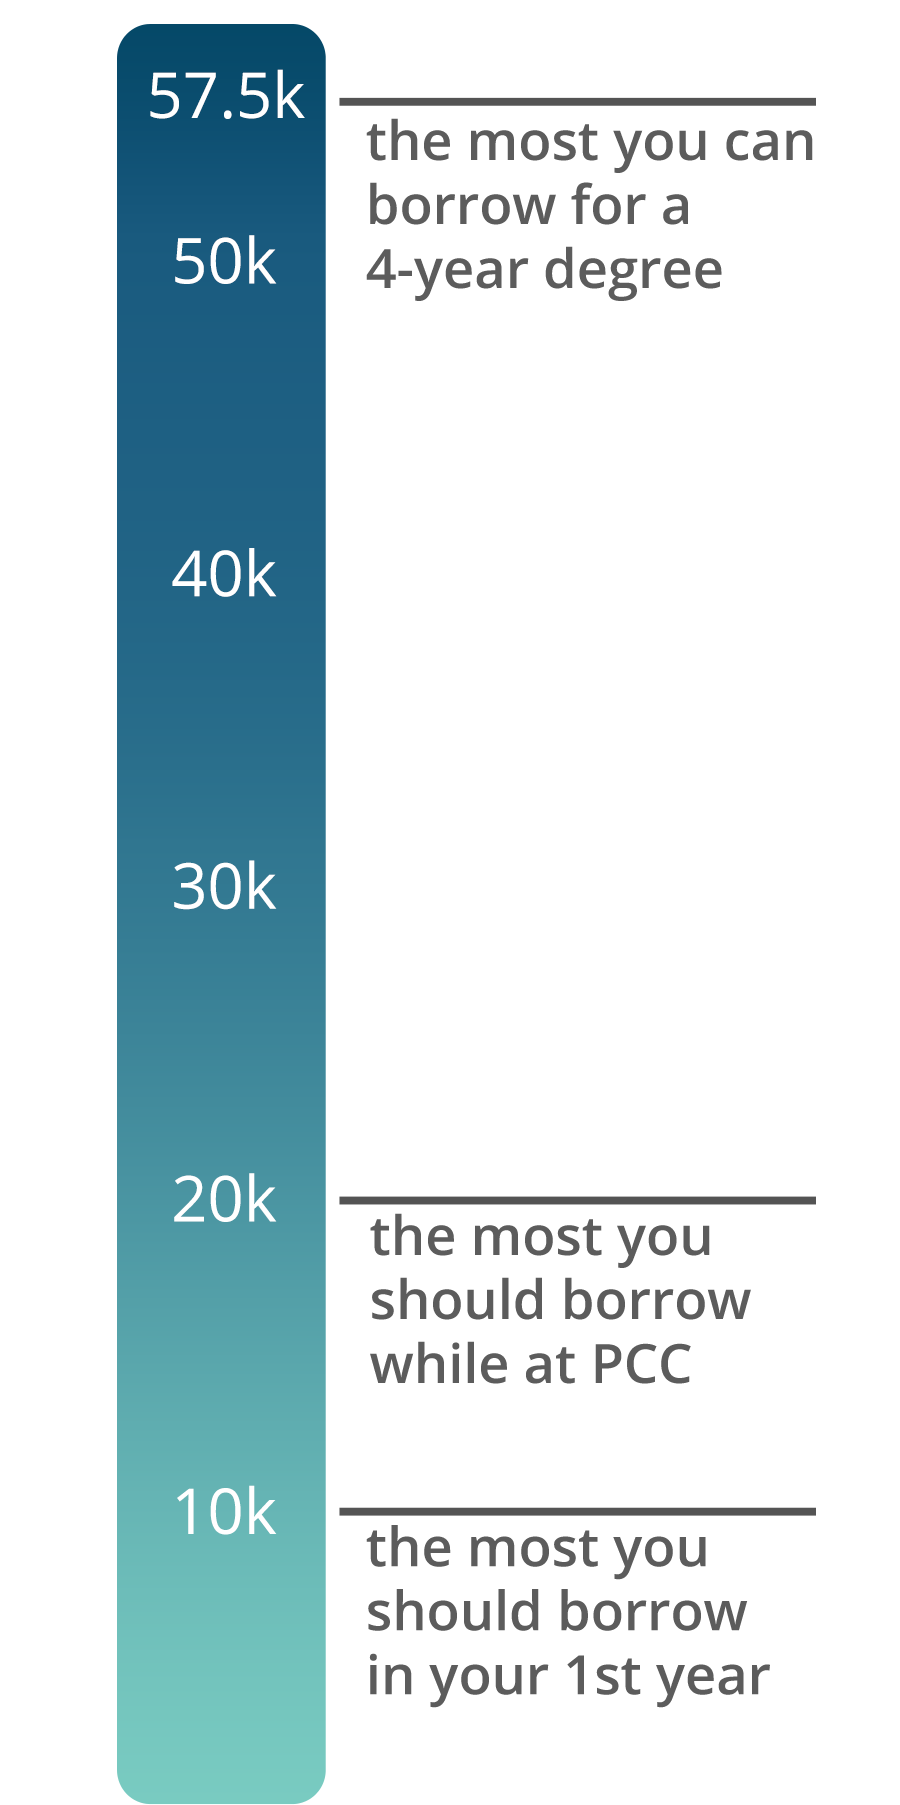 Graphic of loan limits for independent student - described in following text